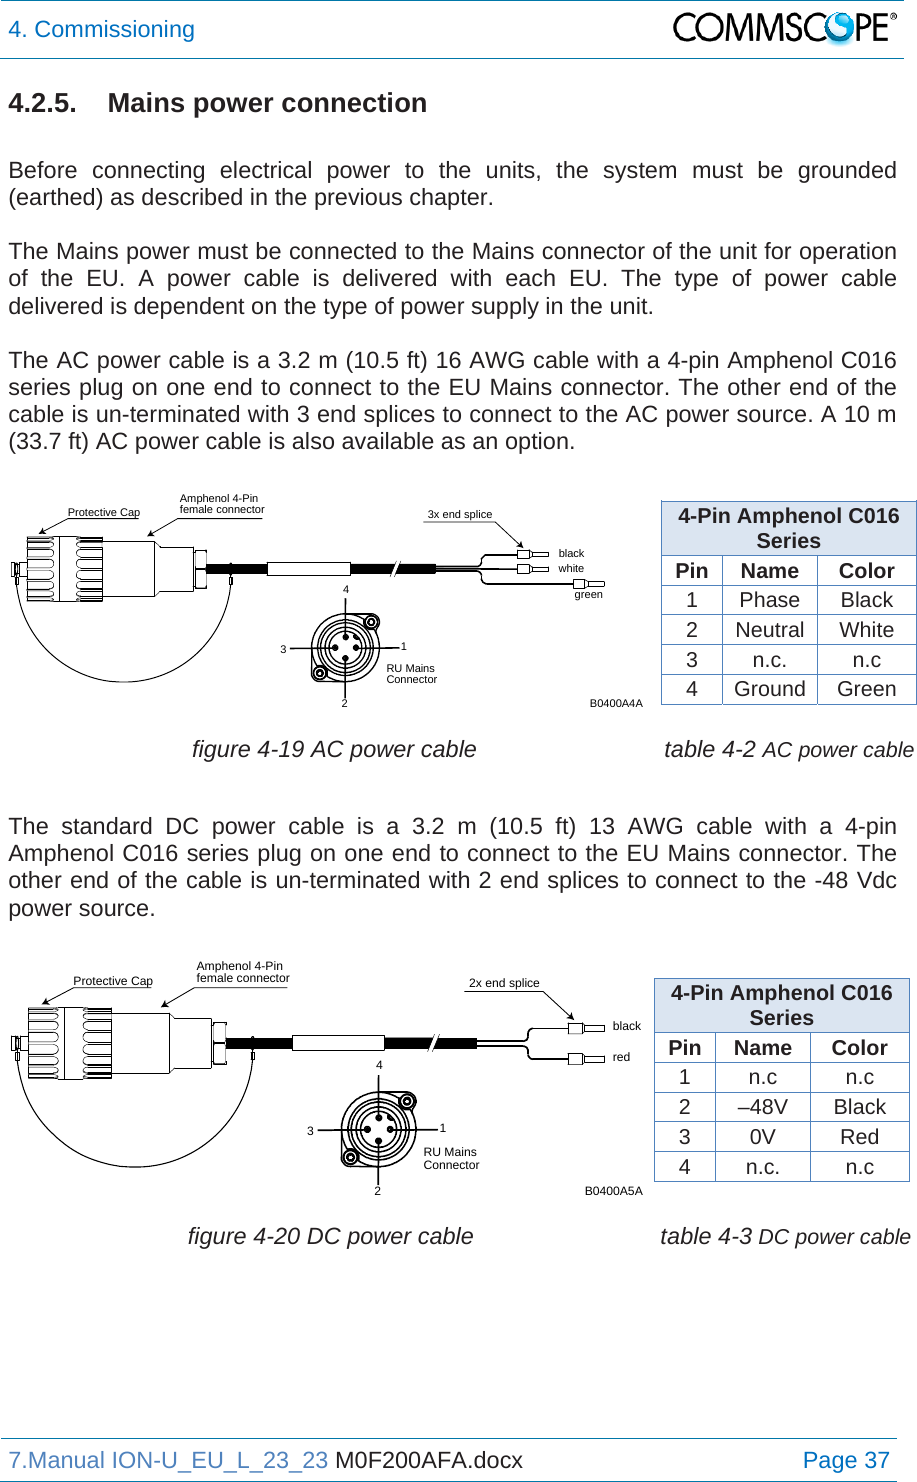 4. Commissioning  7.Manual ION-U_EU_L_23_23 M0F200AFA.docx Page 37 4.2.5.   Mains power connection  Before connecting electrical power to the units, the system must be grounded (earthed) as described in the previous chapter.  The Mains power must be connected to the Mains connector of the unit for operation of the EU. A power cable is delivered with each EU. The type of power cable delivered is dependent on the type of power supply in the unit.  The AC power cable is a 3.2 m (10.5 ft) 16 AWG cable with a 4-pin Amphenol C016 series plug on one end to connect to the EU Mains connector. The other end of the cable is un-terminated with 3 end splices to connect to the AC power source. A 10 m (33.7 ft) AC power cable is also available as an option.   4-Pin Amphenol C016 Series Pin Name  Color 1 Phase Black  2 Neutral White 3 n.c.  n.c 4 Ground Green  figure 4-19 AC power cable  table 4-2 AC power cable The standard DC power cable is a 3.2 m (10.5 ft) 13 AWG cable with a 4-pin Amphenol C016 series plug on one end to connect to the EU Mains connector. The other end of the cable is un-terminated with 2 end splices to connect to the -48 Vdc power source.  4-Pin Amphenol C016 Series Pin Name  Color 1 n.c  n.c 2 –48V Black 3 0V  Red 4 n.c.  n.c  figure 4-20 DC power cable  table 4-3 DC power cableblackAmphenol 4-Pinfemale connectorProtective Cap 3x end splicewhitegreenB0400A4ARU MainsConnector4321blackAmphenol 4-Pinfemale connectorProtective Cap 2x end spliceredB0400A5ARU MainsConnector4321